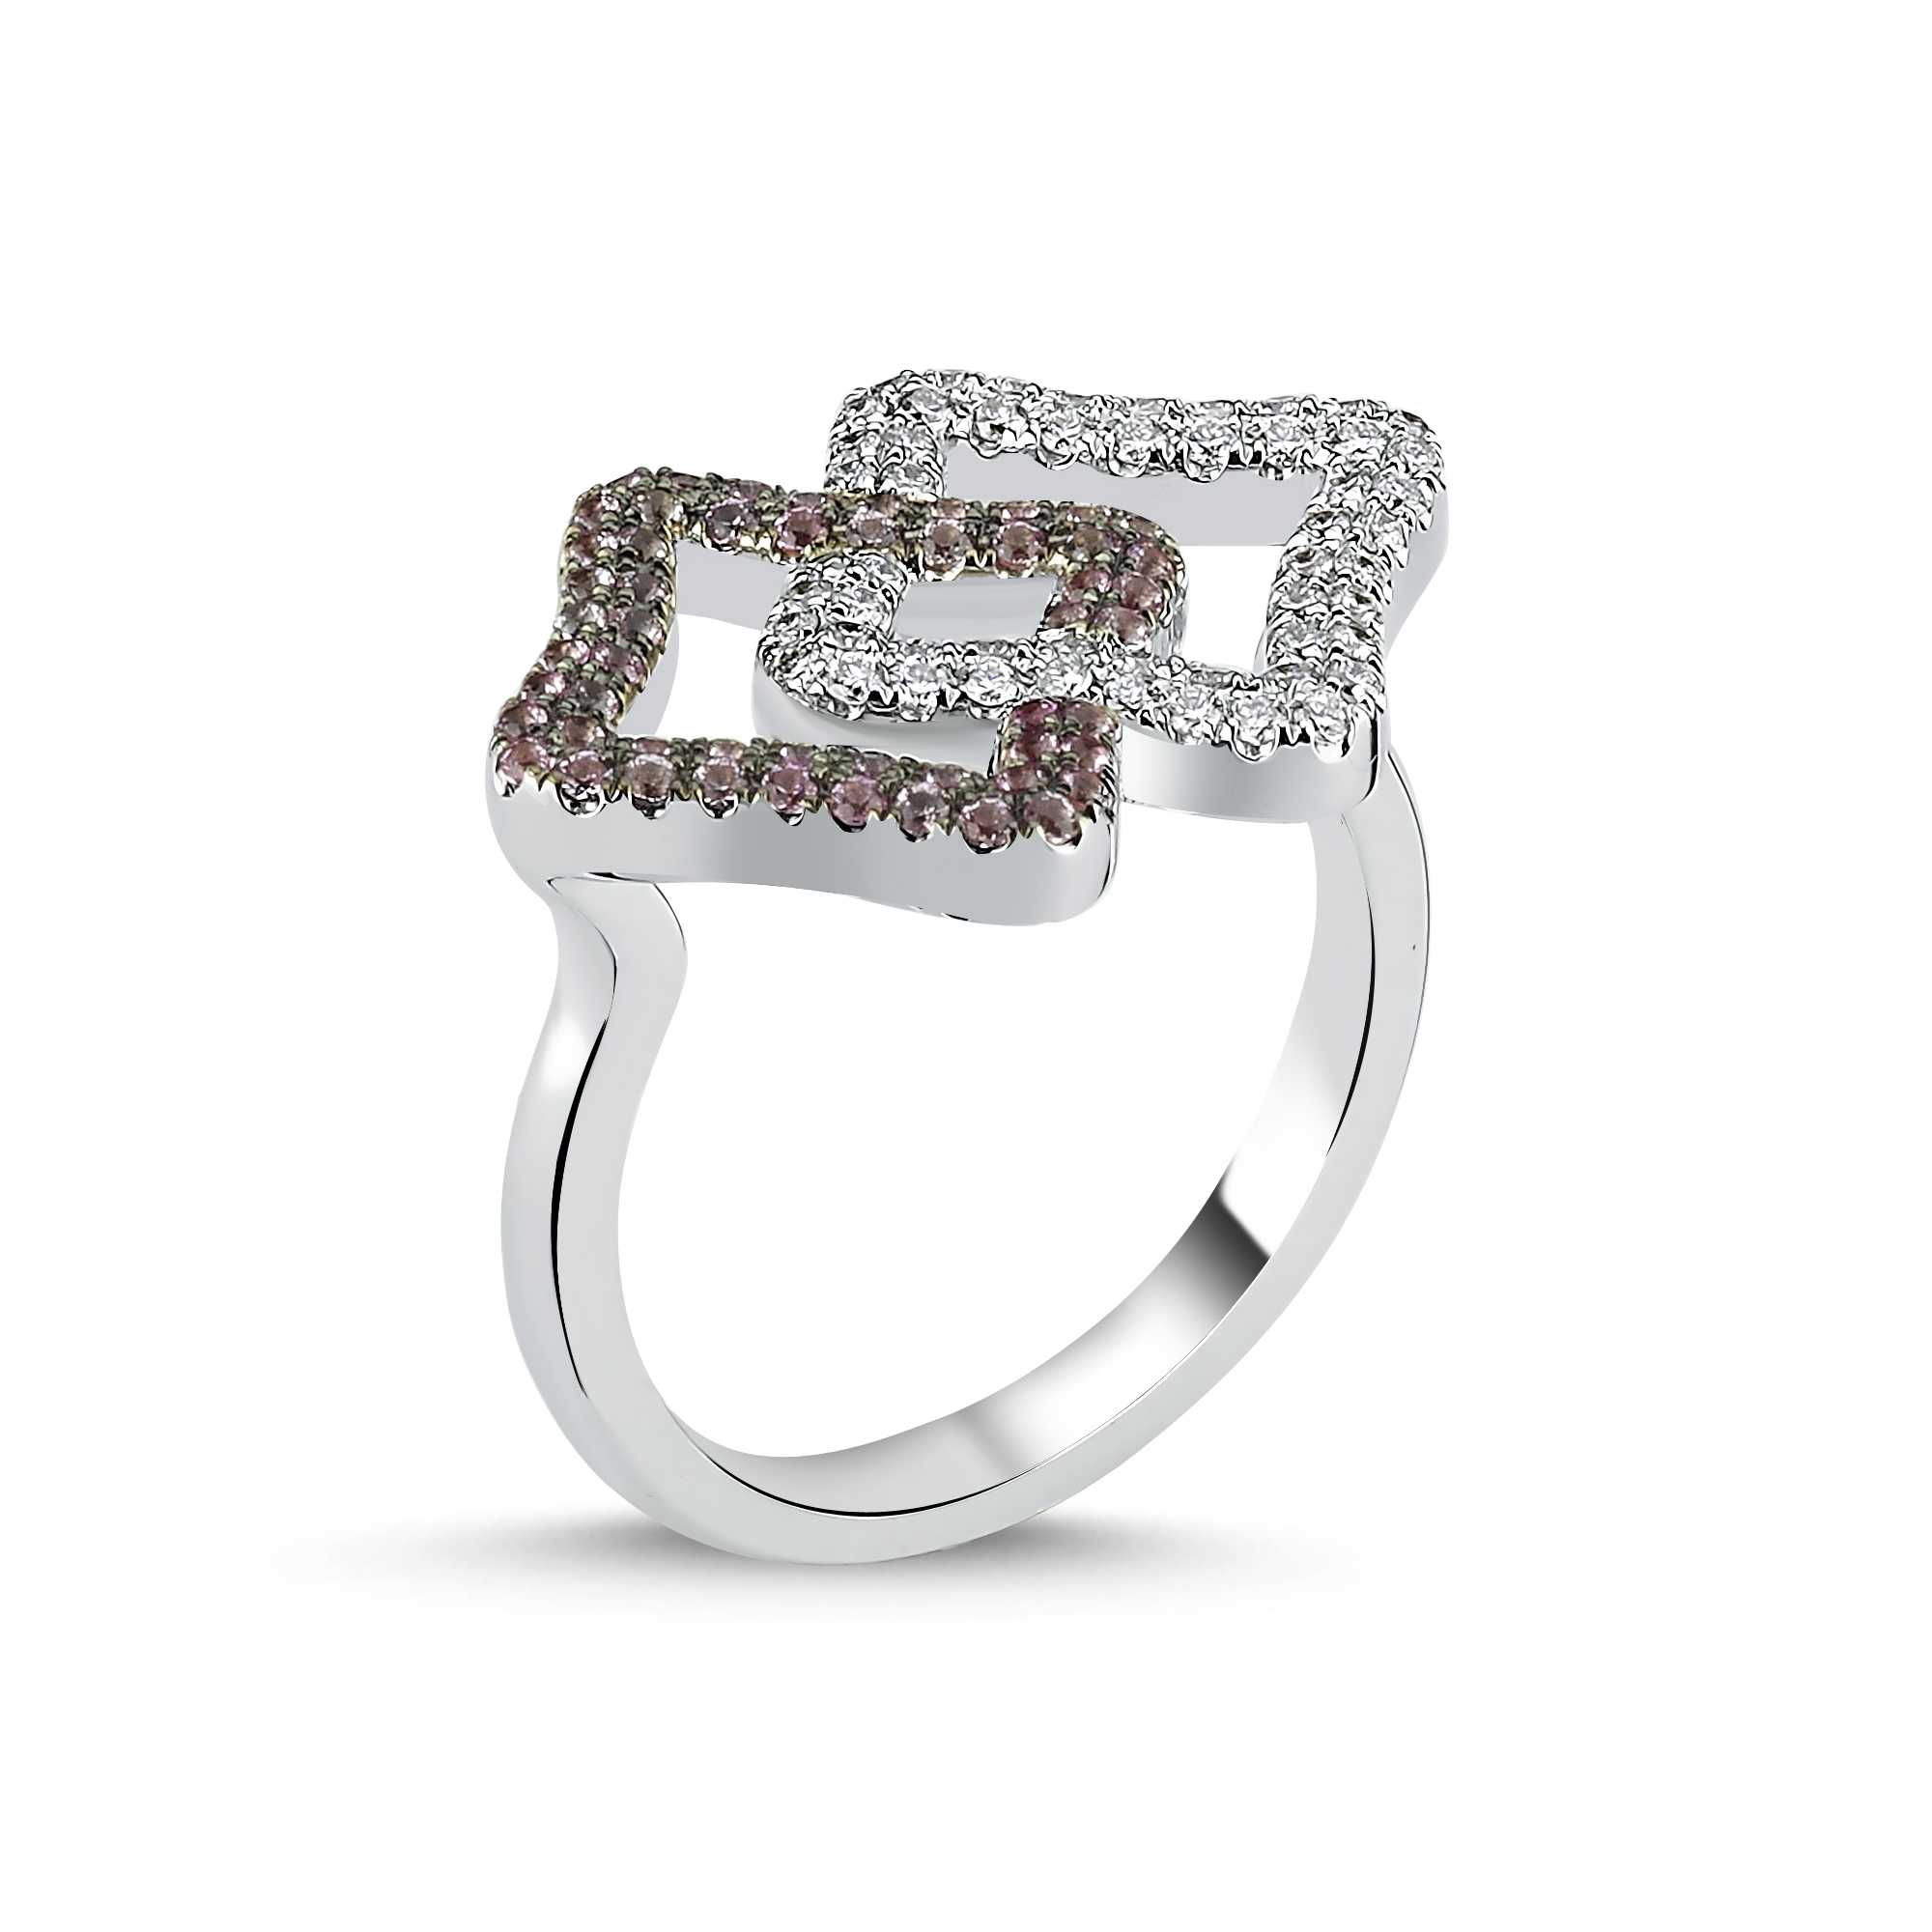 Intertwined Ring